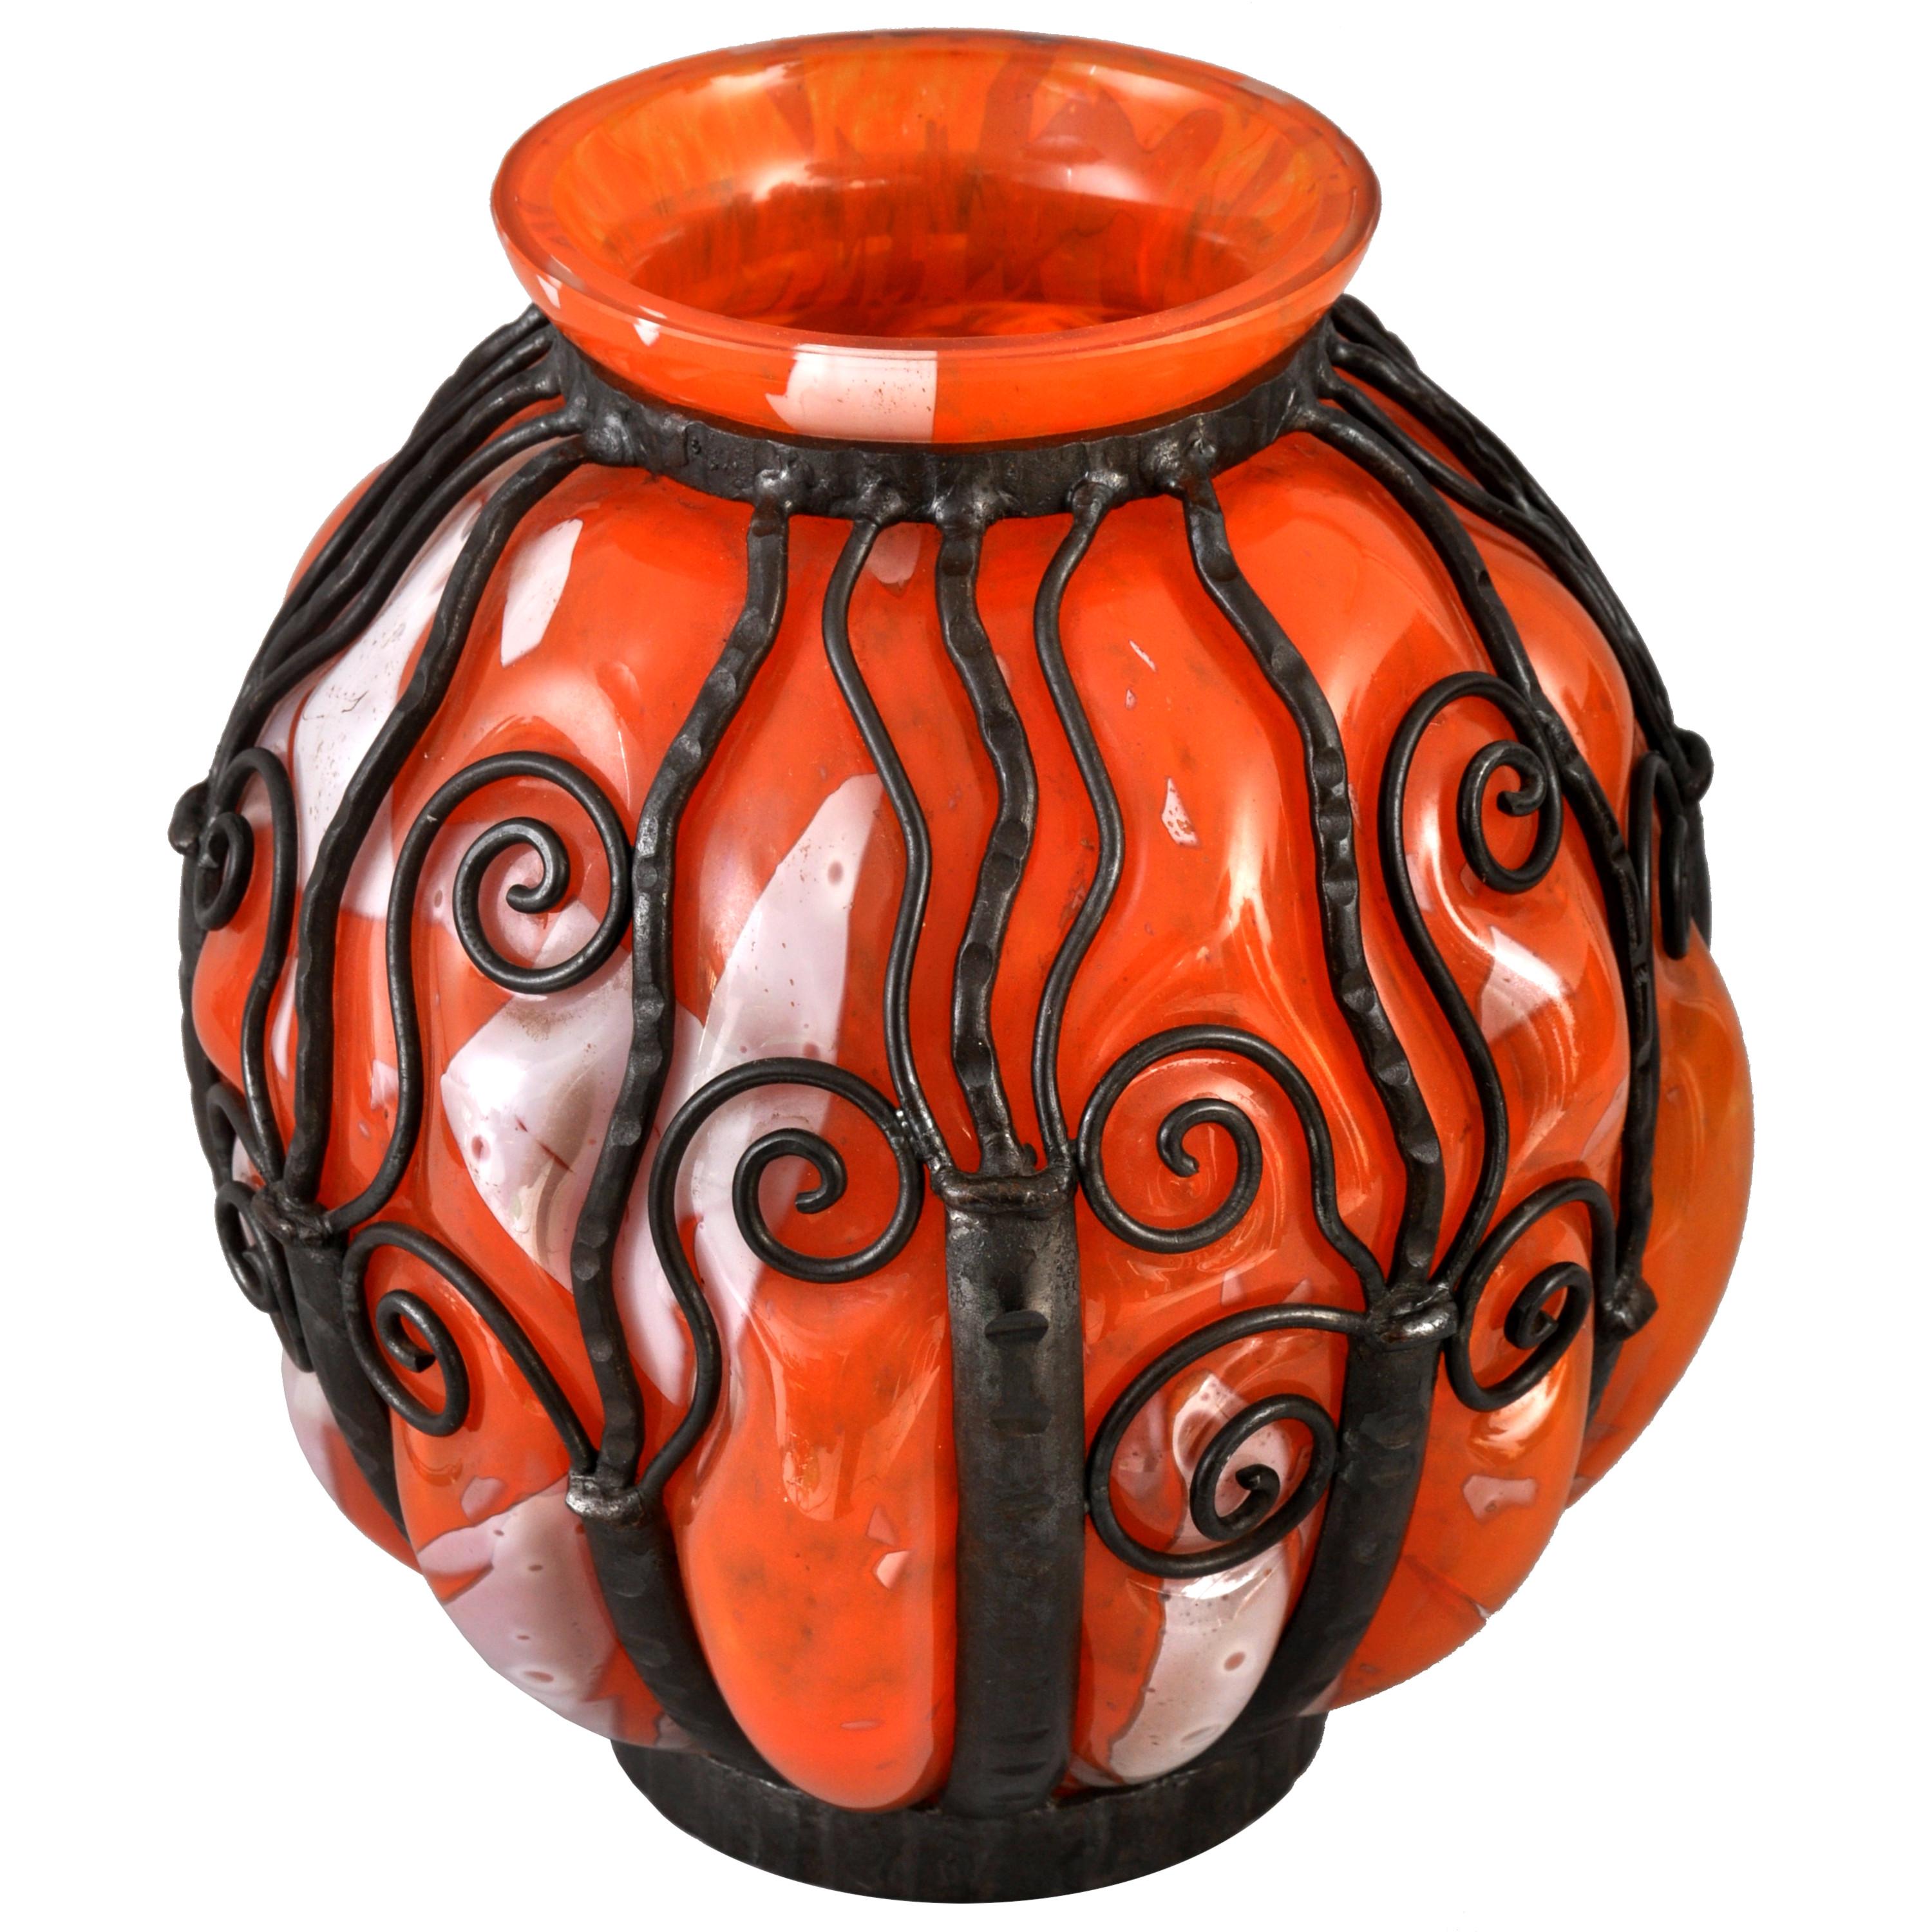 A very large French Art Deco glass and handwrought iron vase by Daum Verreries d'Art Lorrain, 1920s. The vase of very substantial size and having a mottled orange and cream glass vase, blown into hand forged iron armature. The vase is signed